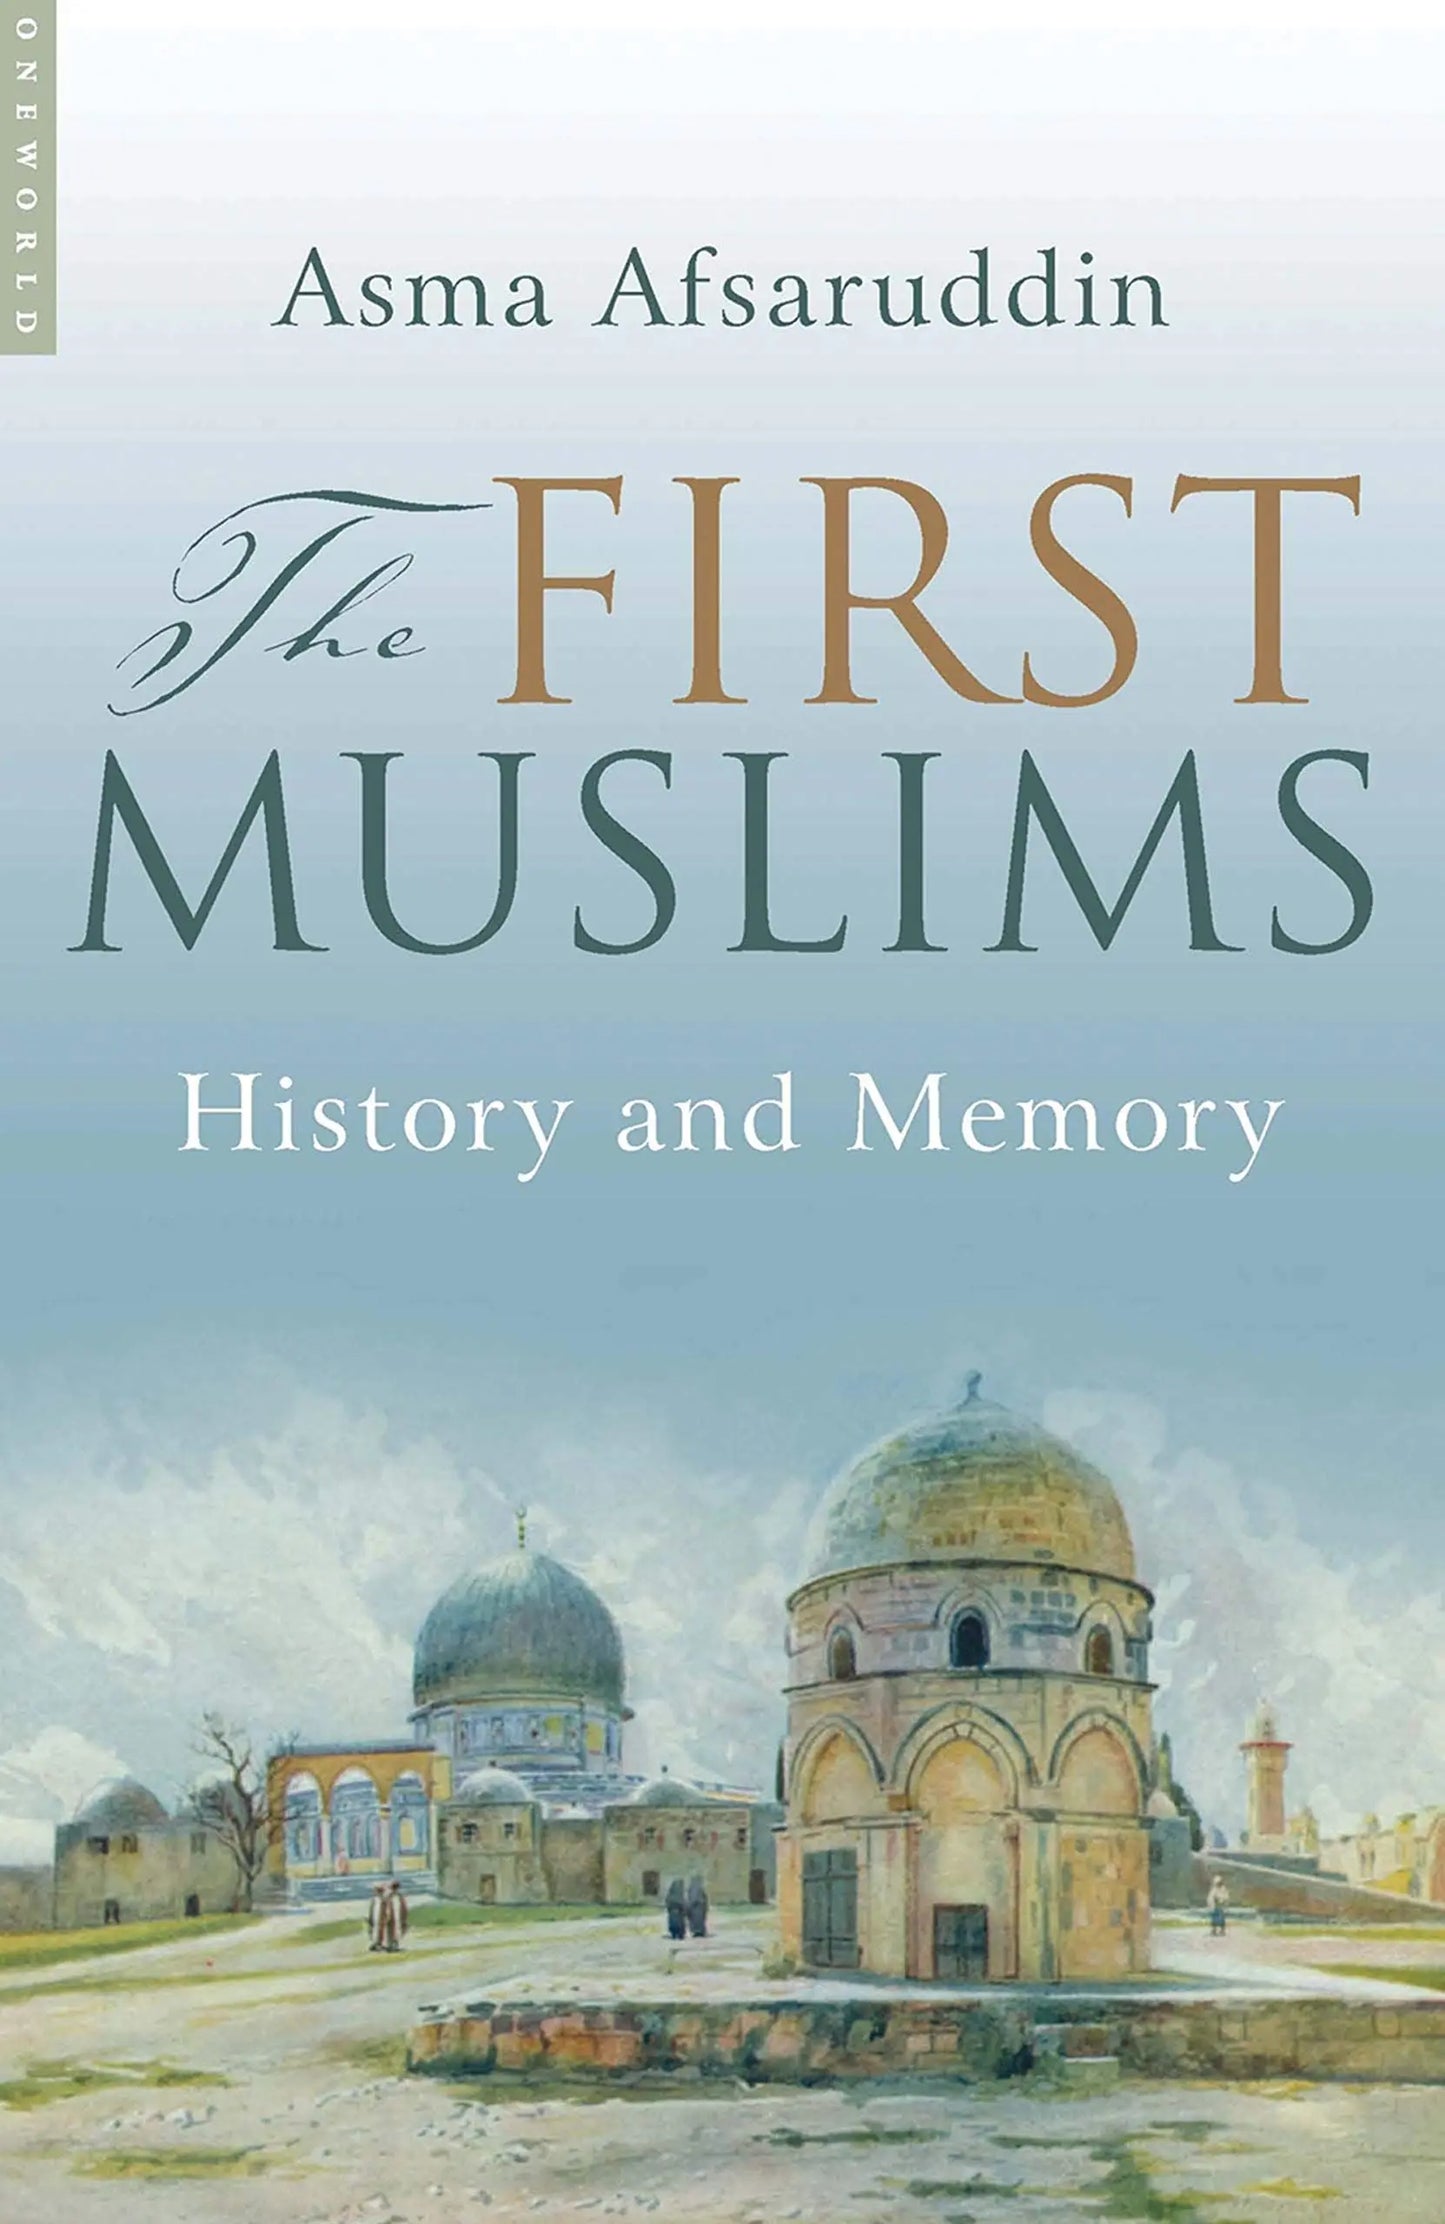 The First Muslims: History and Memory